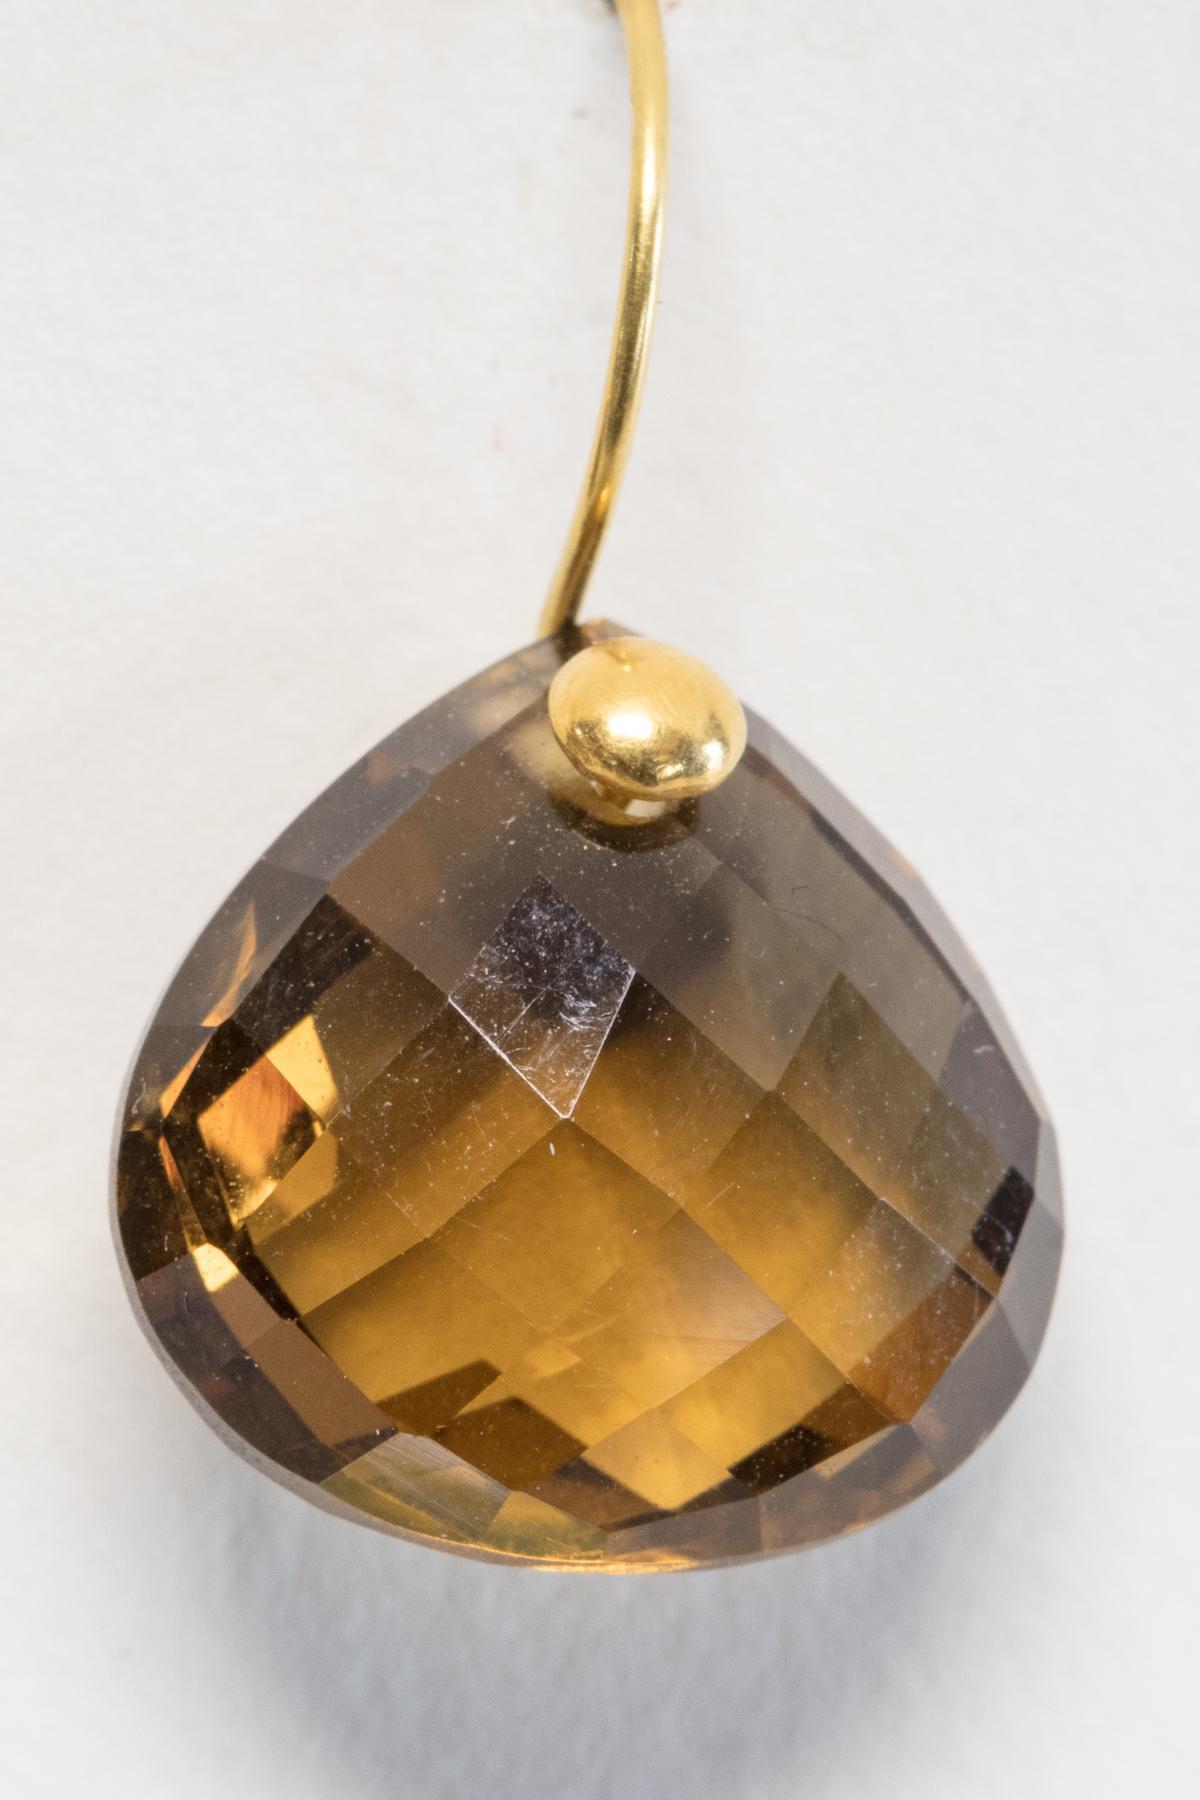 Pear-shaped faceted citrine drops on 18K gold wires.  For pierced ears.  Lovely deep color and excellent cut.